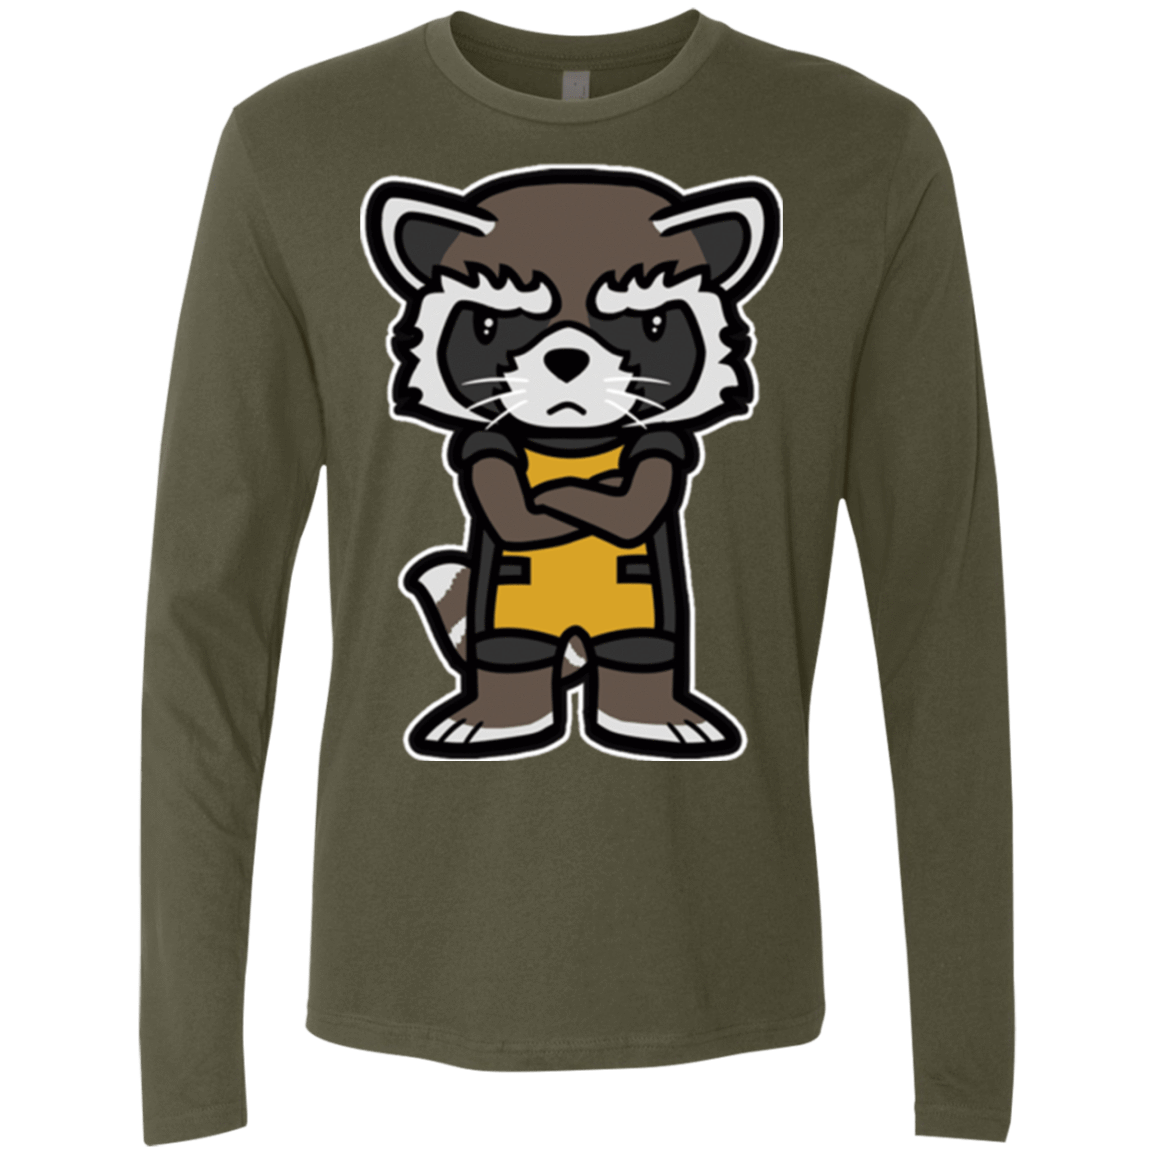 T-Shirts Military Green / Small Angry Racoon Men's Premium Long Sleeve